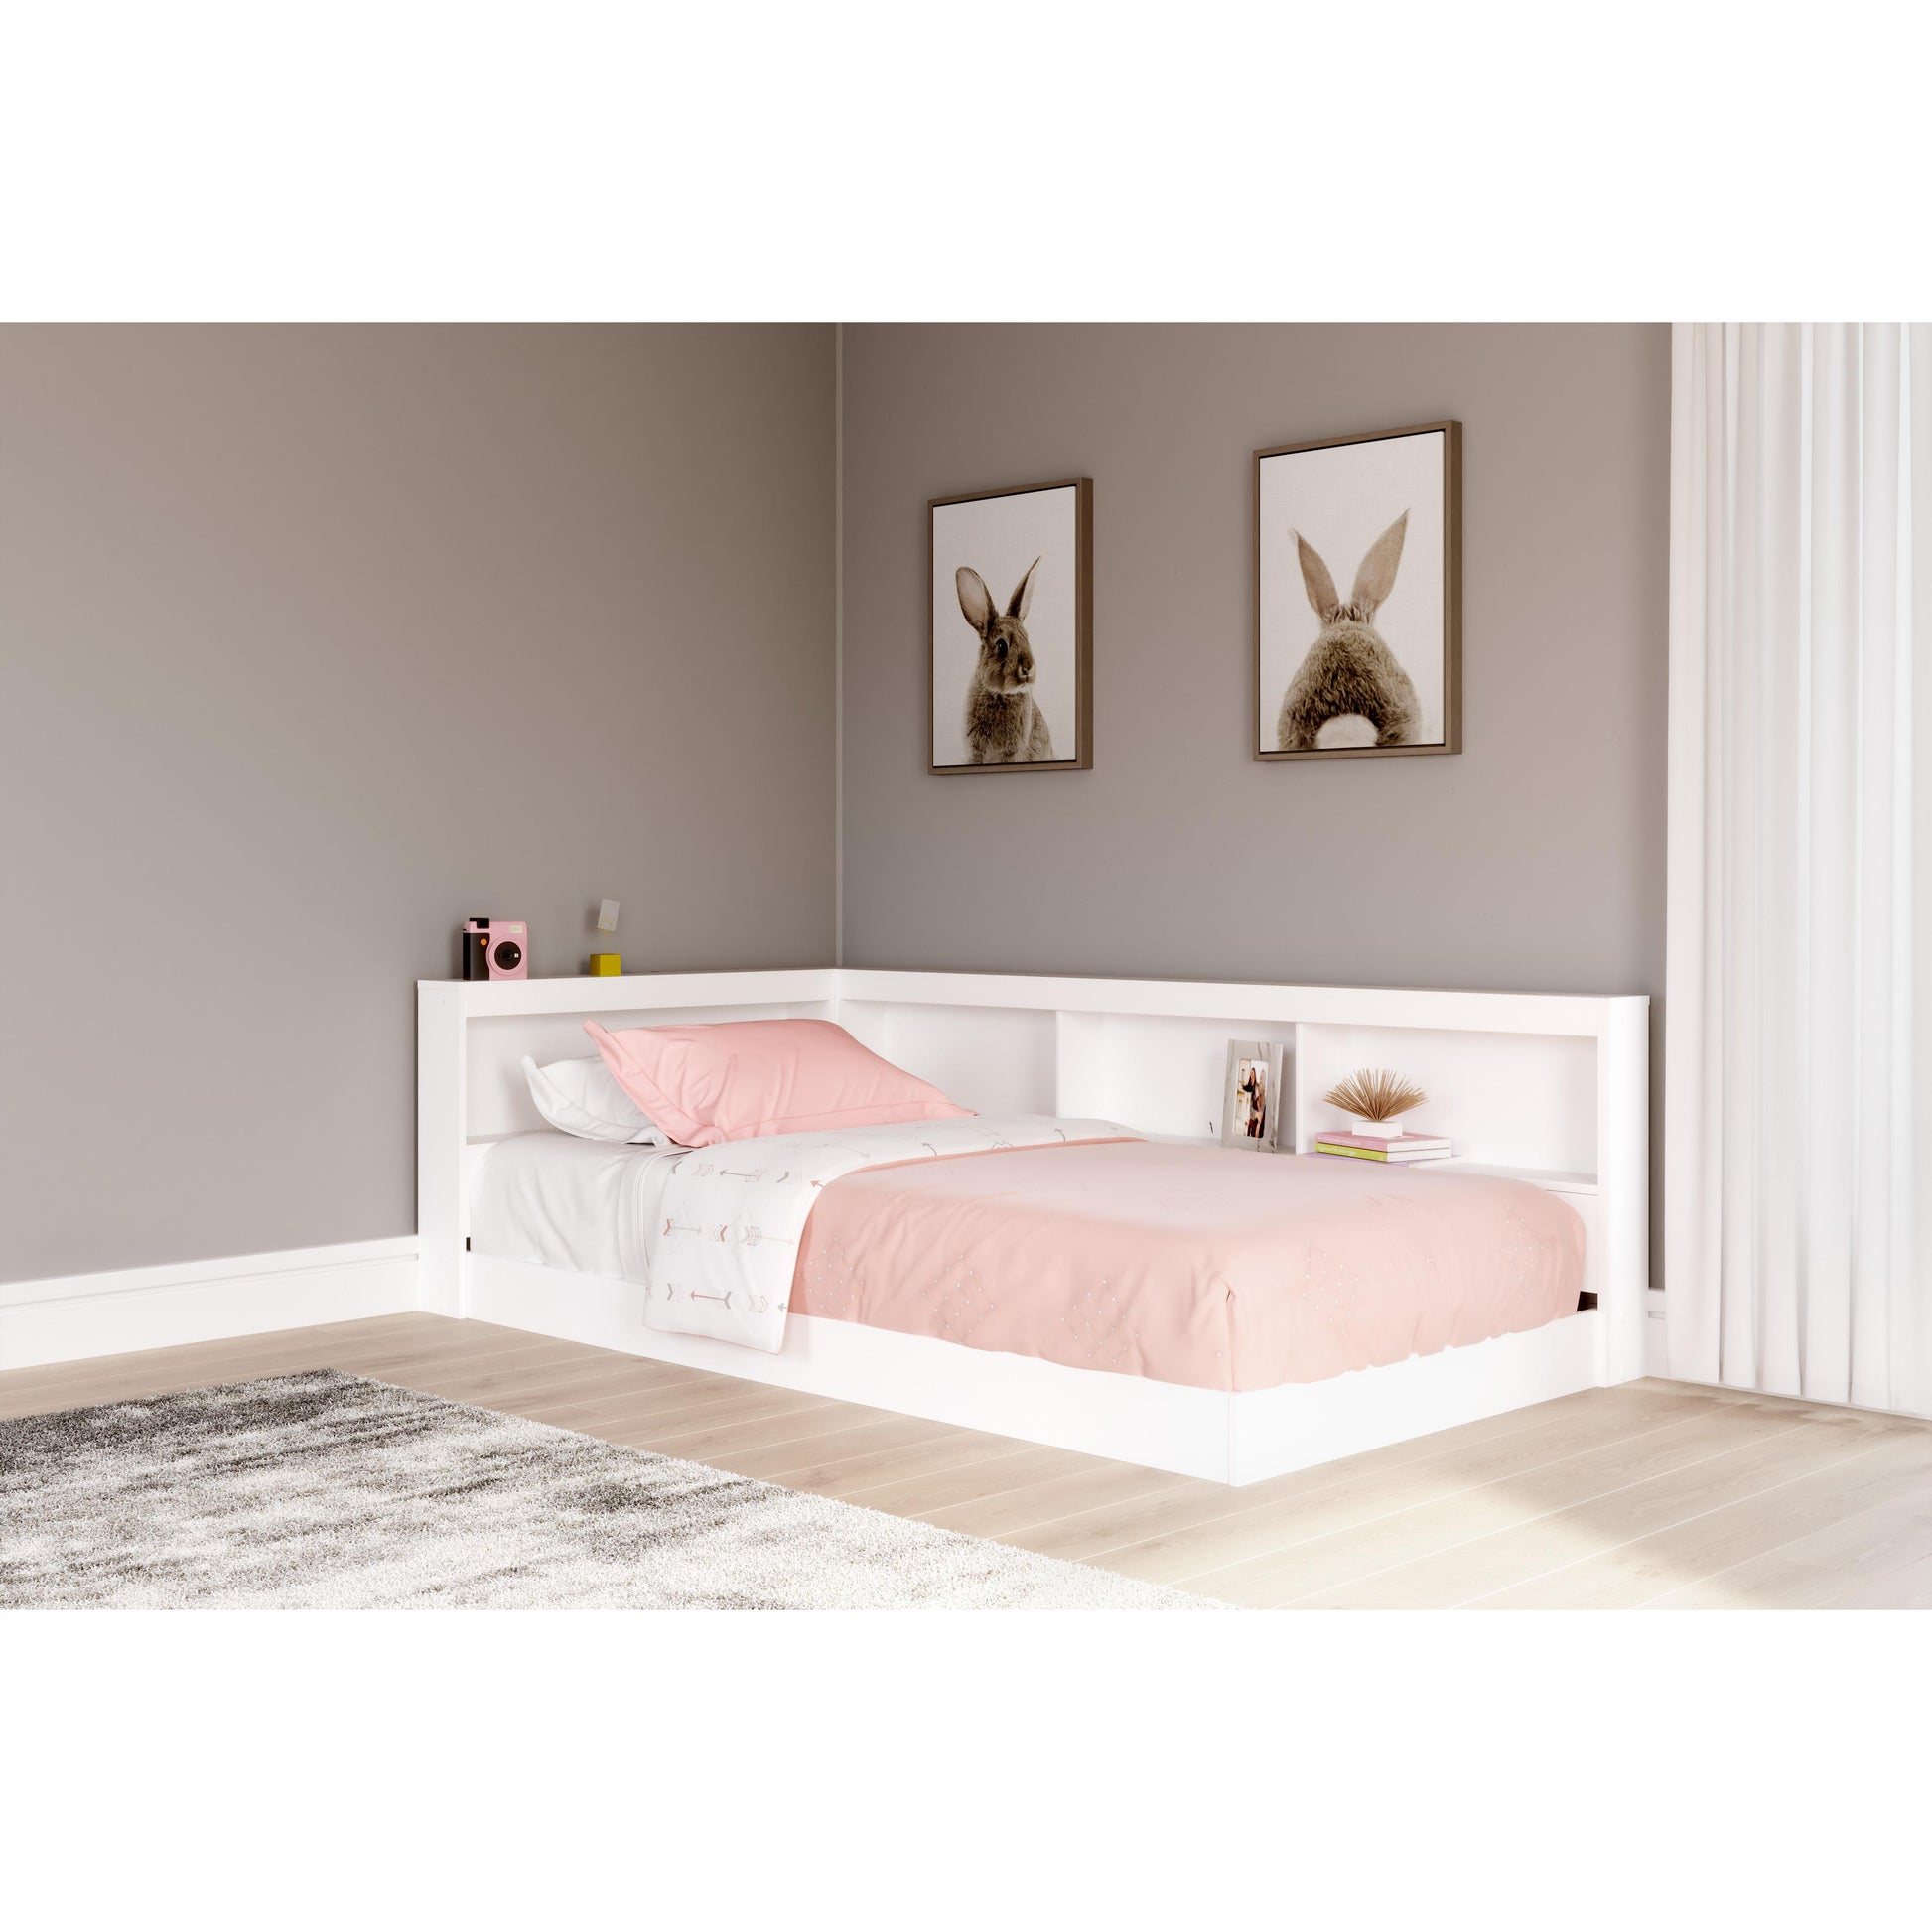 Signature Design by Ashley Kids Beds Bed EB1221-163/EB1221-182 IMAGE 8